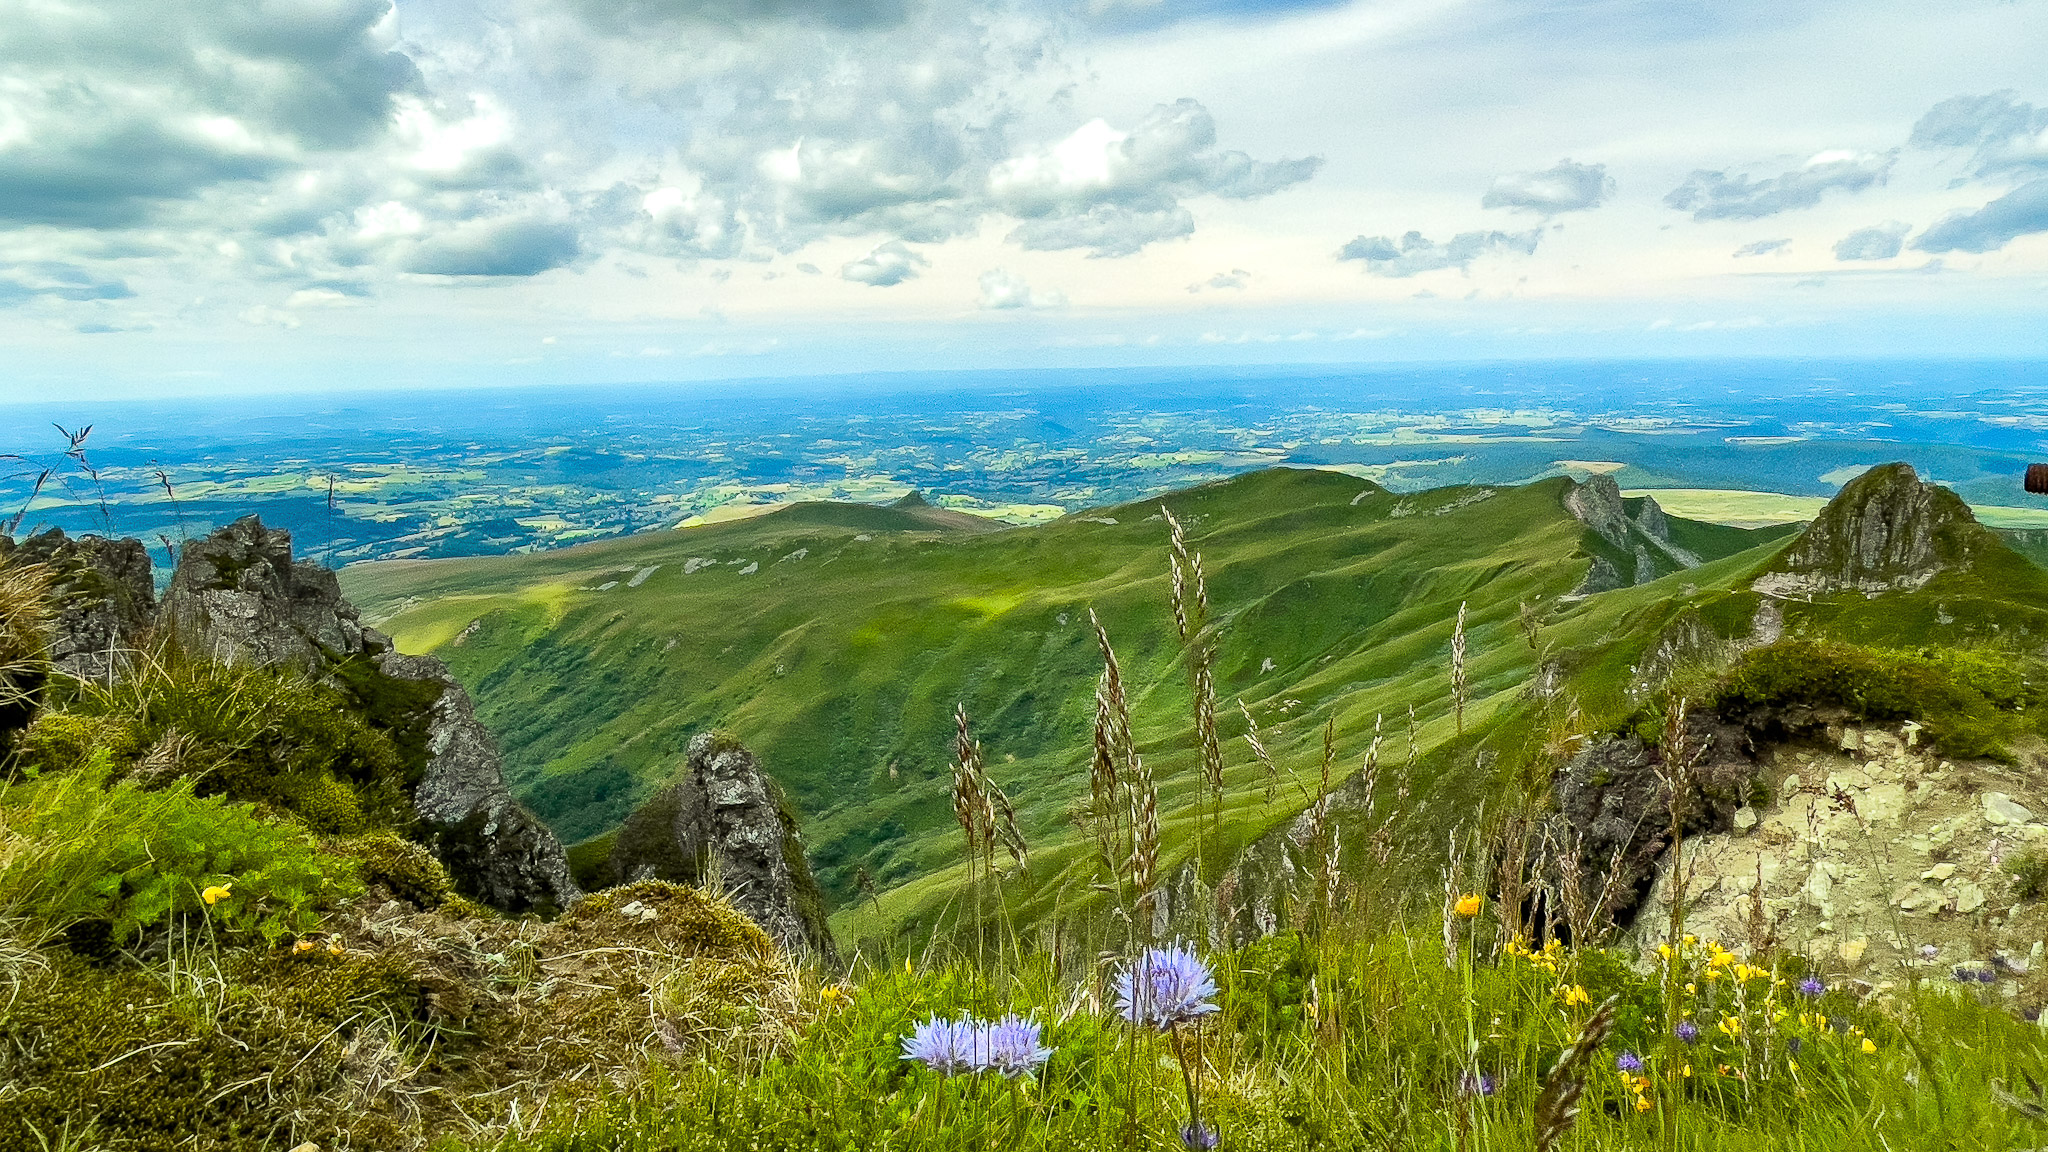 The Chastreix-Sancy Nature Reserve, the Valley of the Fontaine Salée